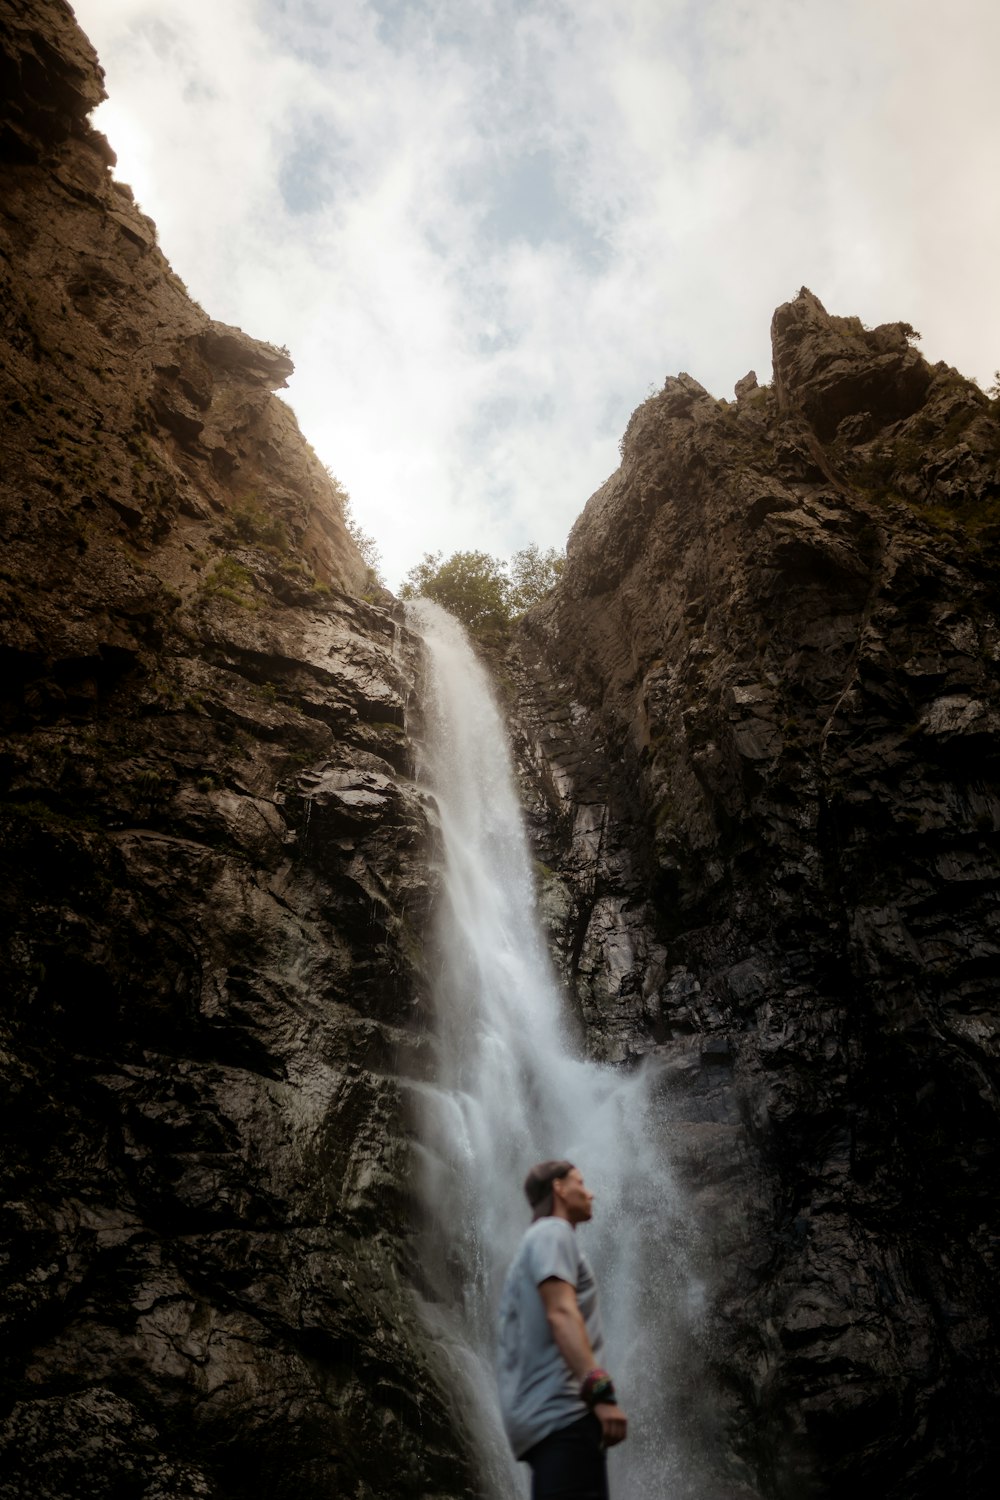 person in white shirt standing on rock near waterfalls during daytime